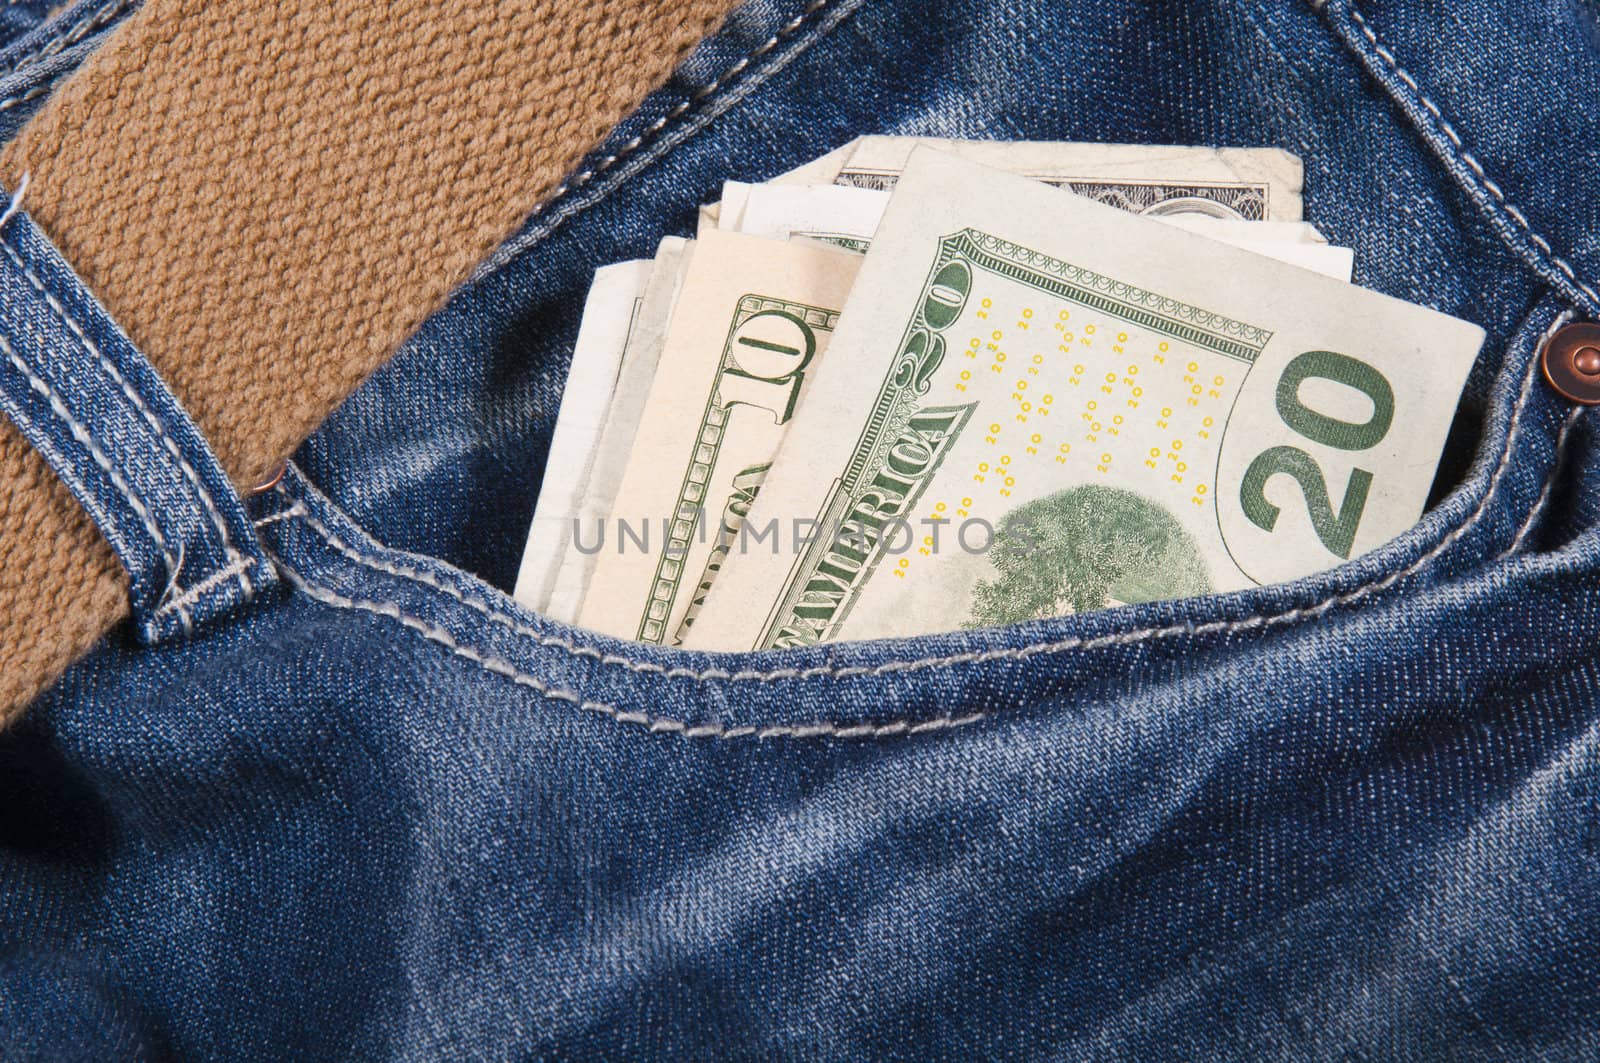 Jeans and Money. by lobzik